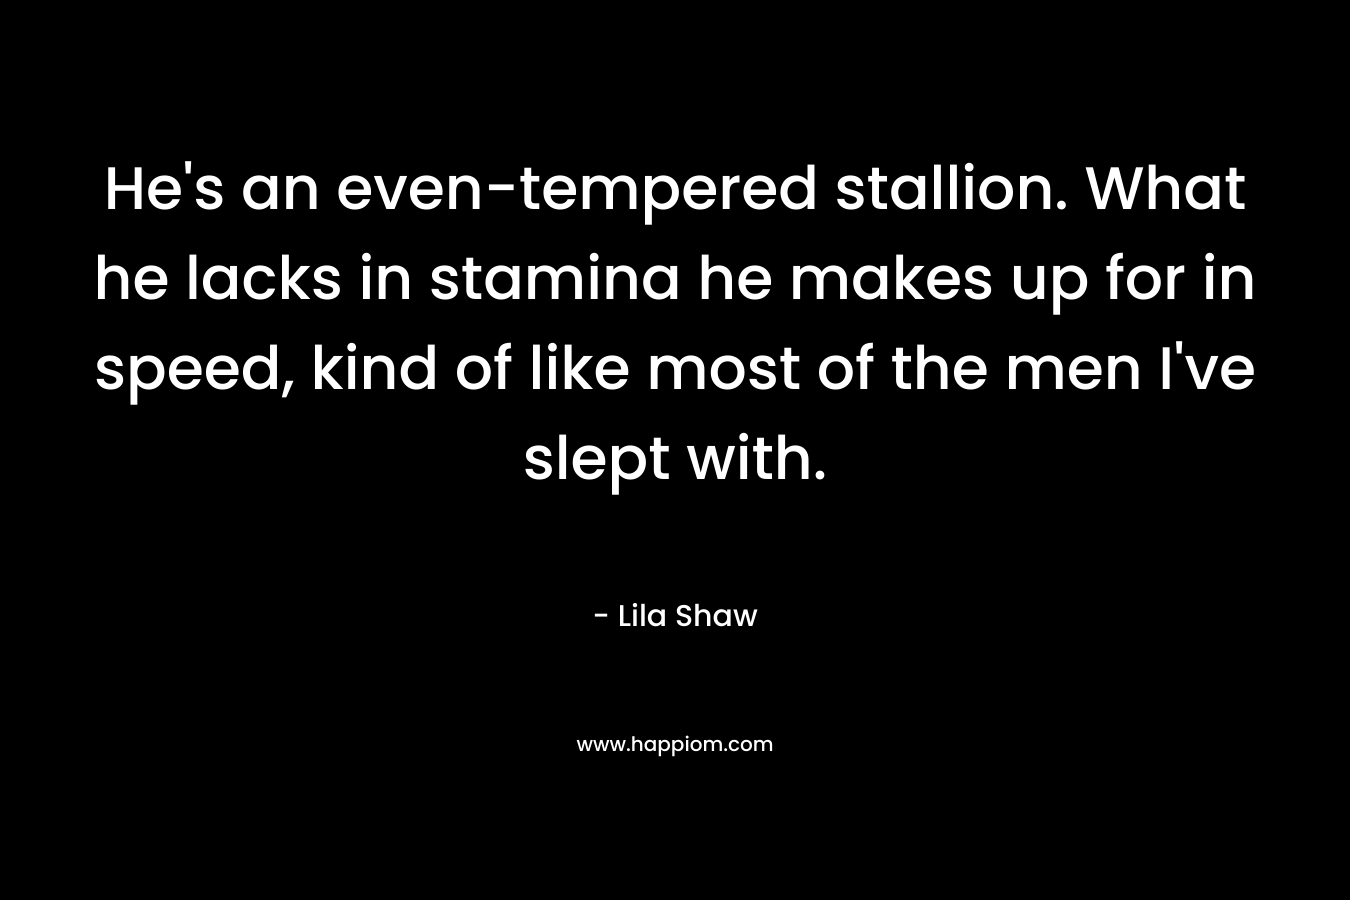 He’s an even-tempered stallion. What he lacks in stamina he makes up for in speed, kind of like most of the men I’ve slept with. – Lila Shaw